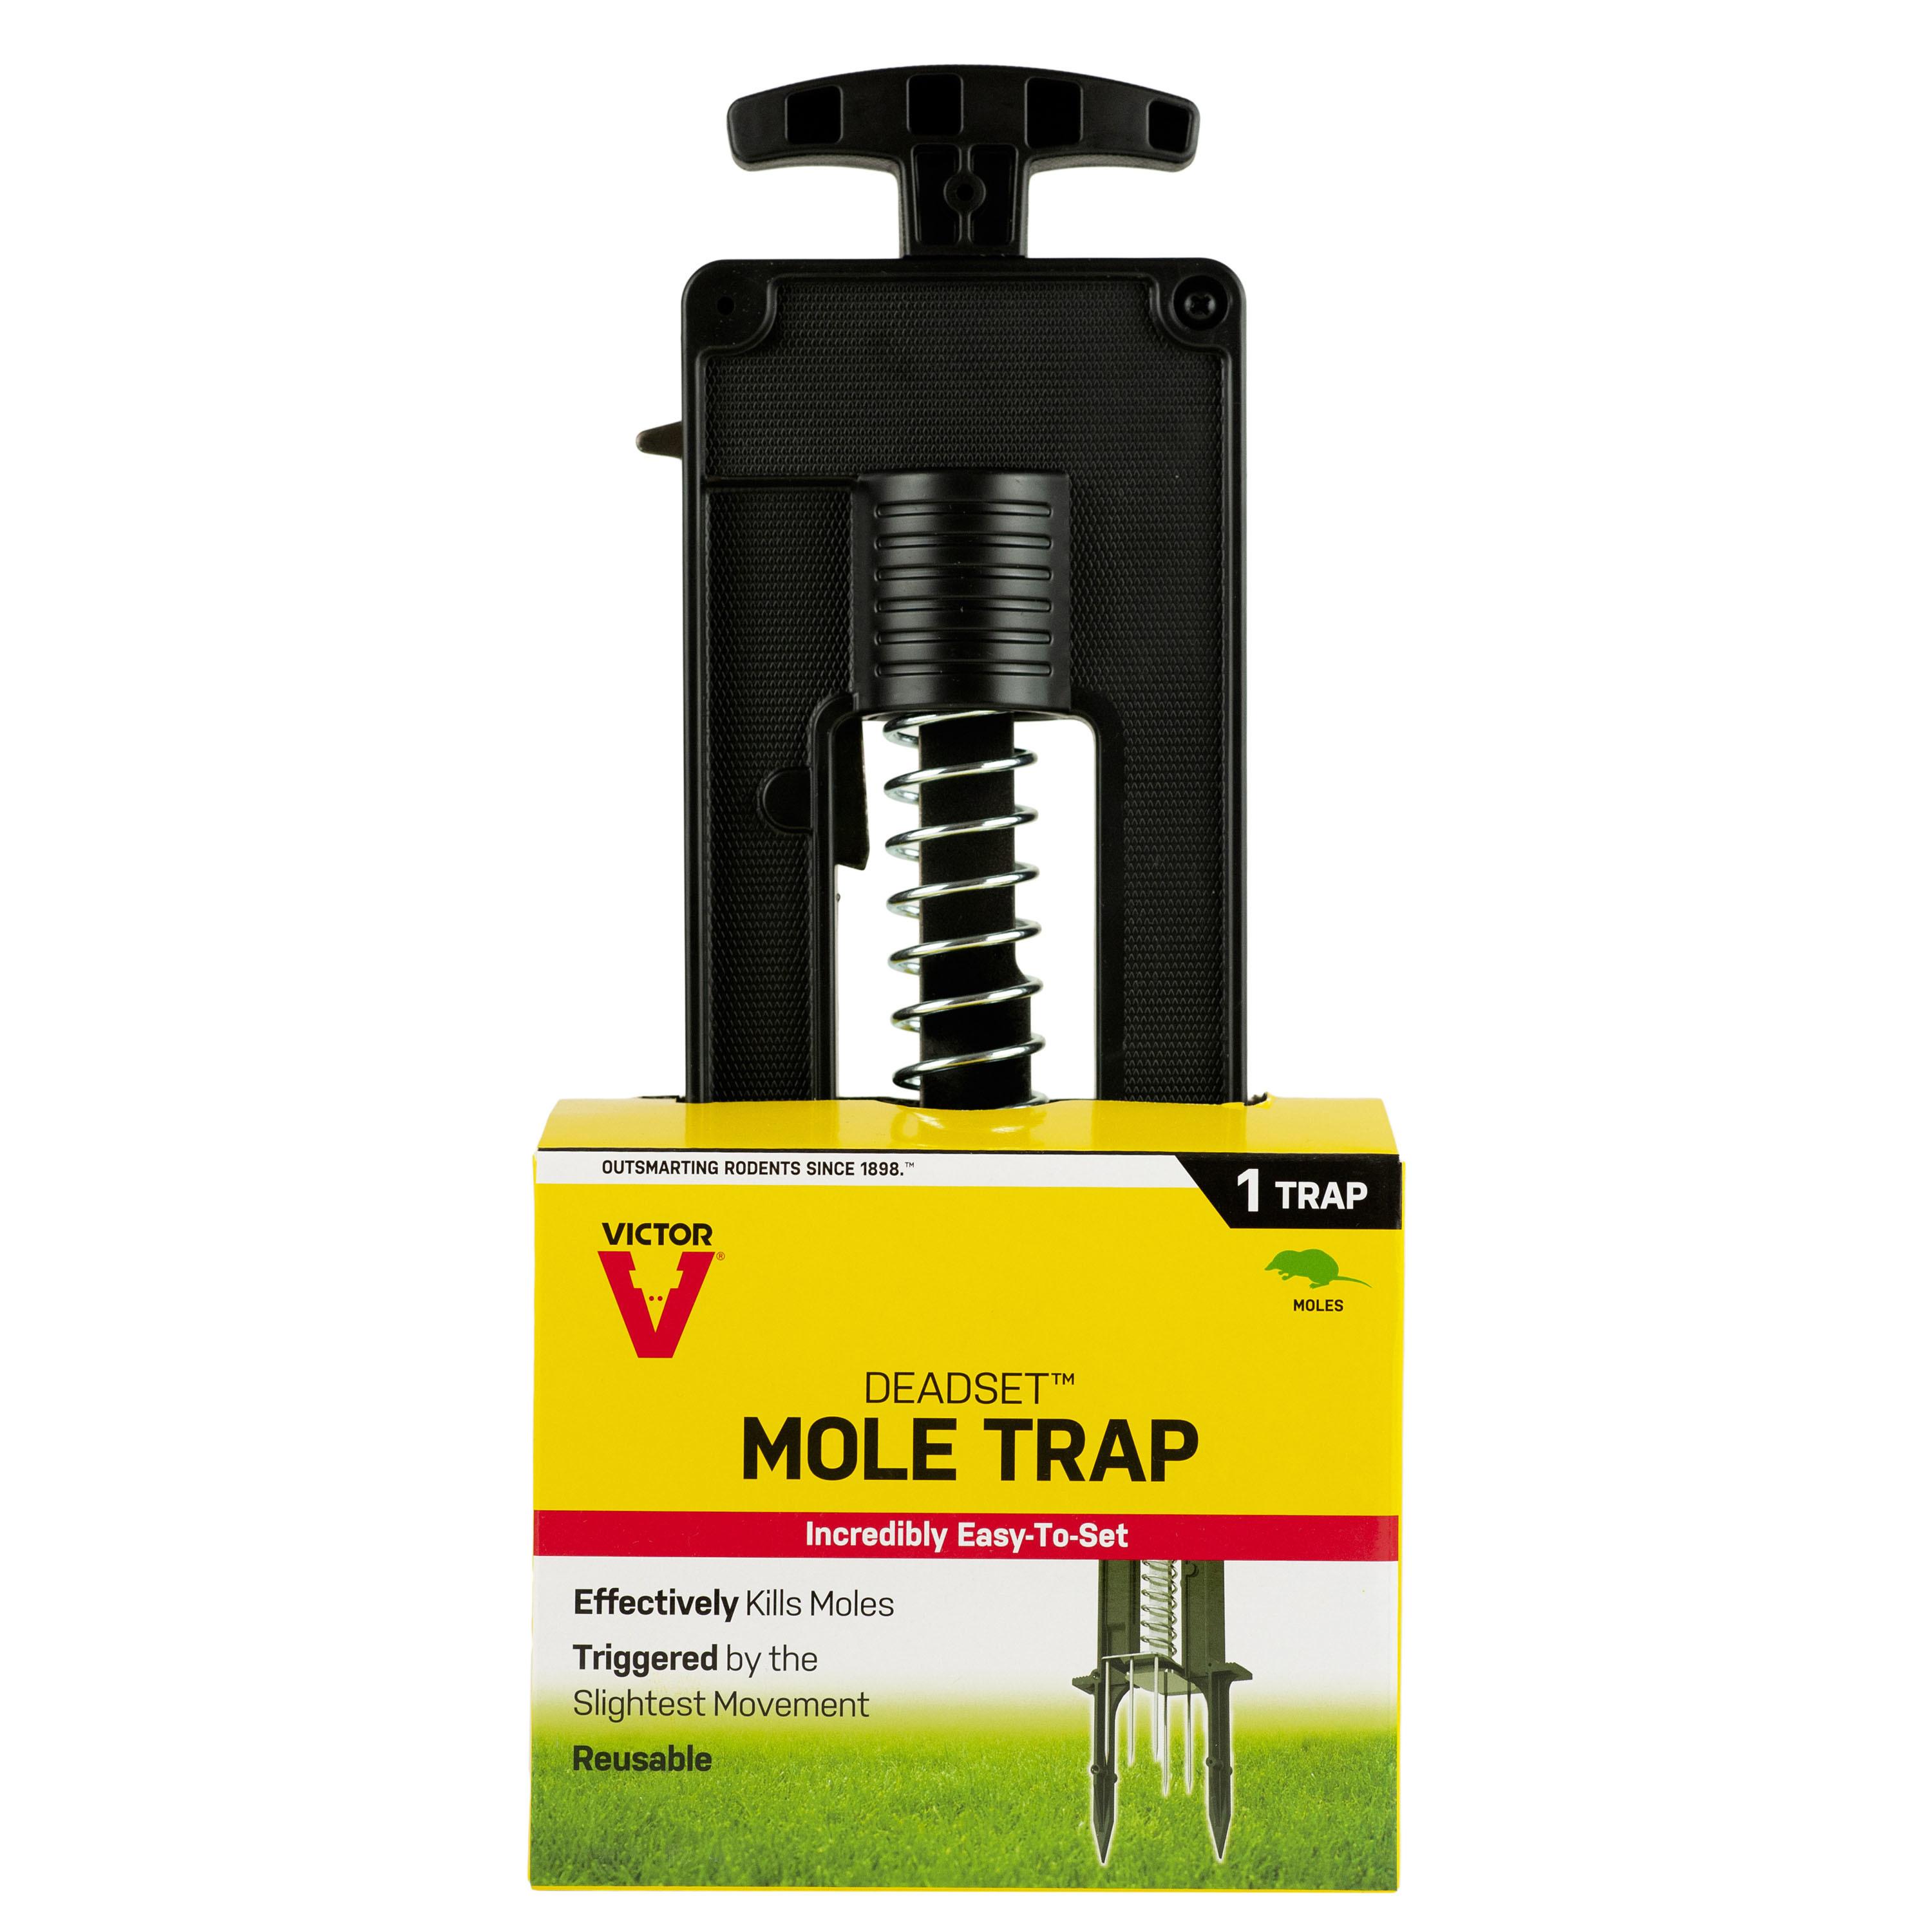 Victor Electronic Mouse Trap -No Touch/No See Disposal- Kills up